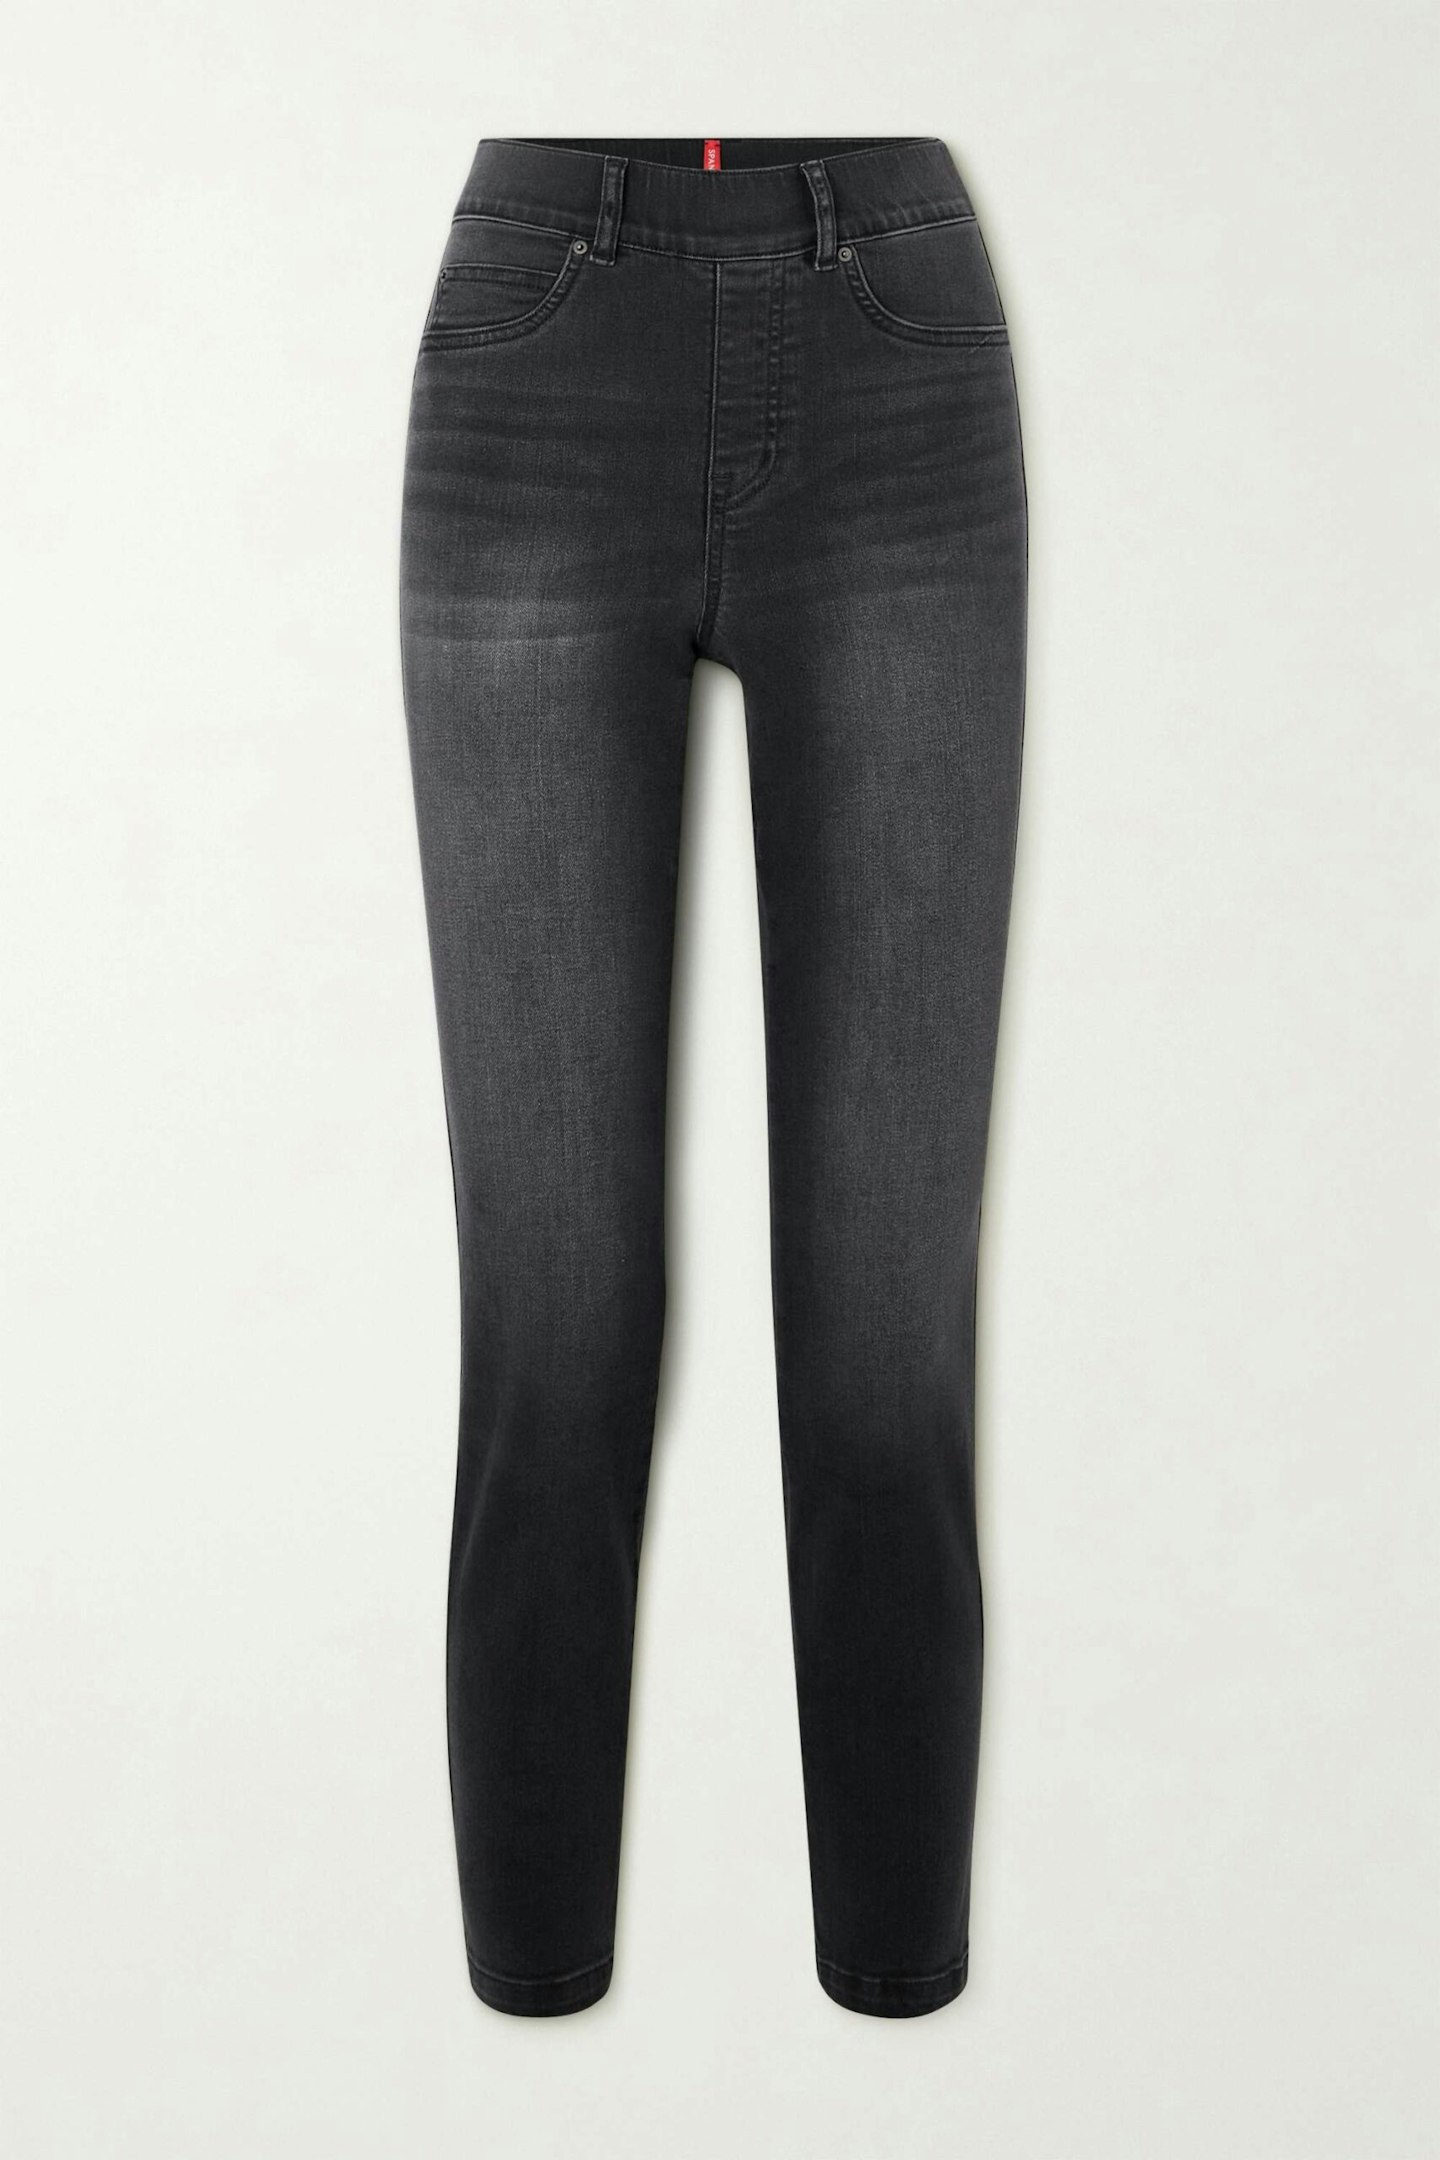 Spanx, Ankle-Cropped High-Rise Straight-Leg Jeans